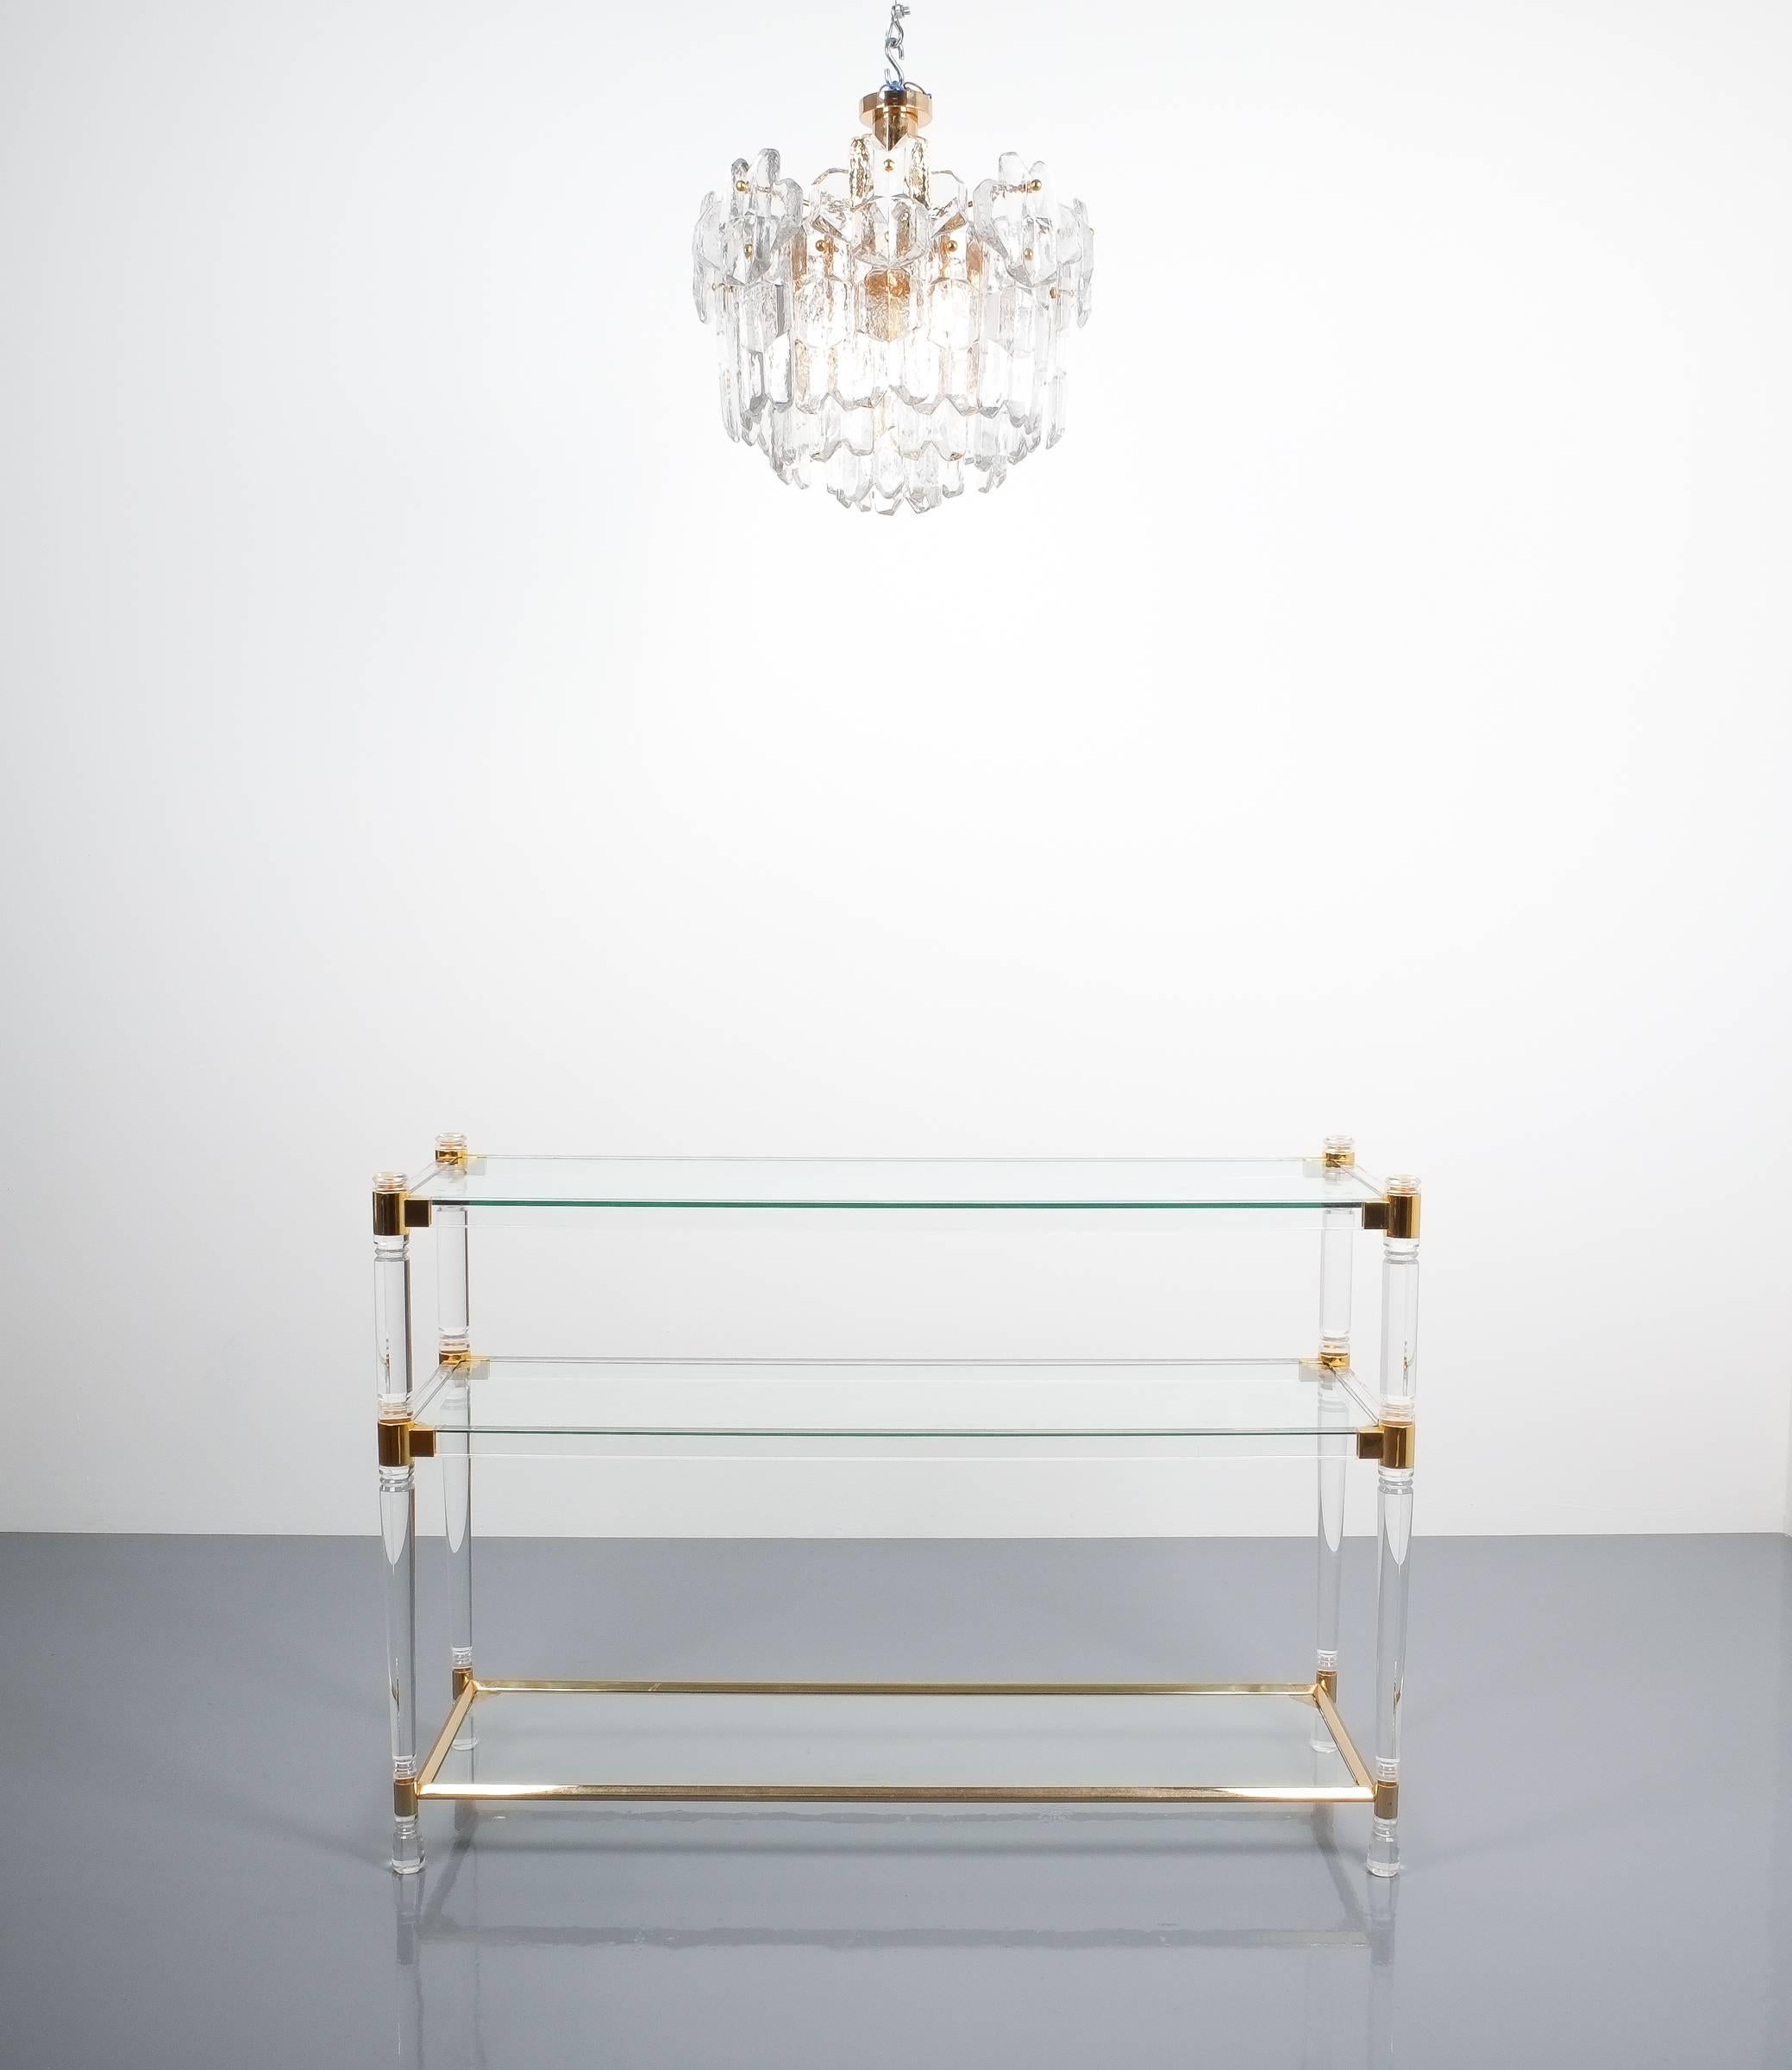 Romeo Rega console table Lucite glass gold brass, 1970. Classical console table by Romeo Rega consisting of round Lucite pillars and gilt brass joints. Three clear glass trays. The table is in excellent condition, minimal traces of use.